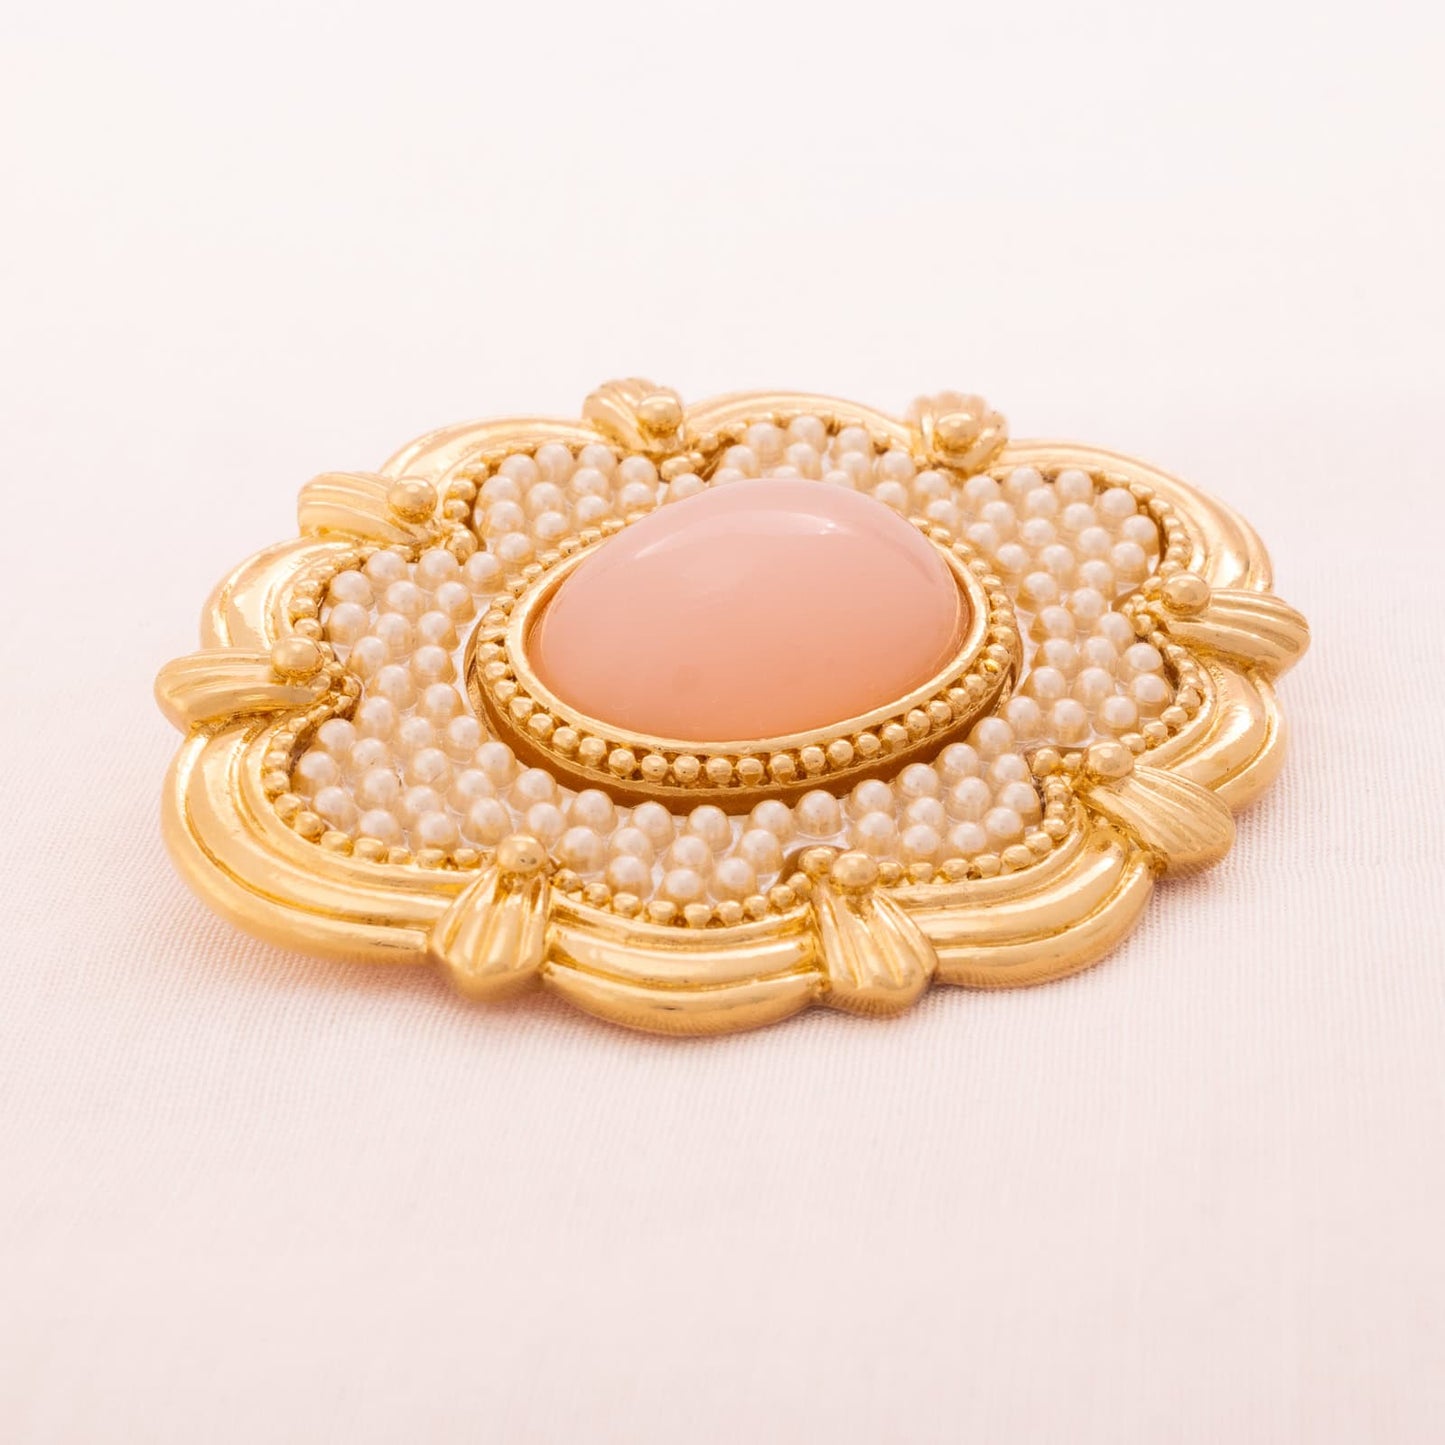 AVON brooch with pink cabochon from 1988